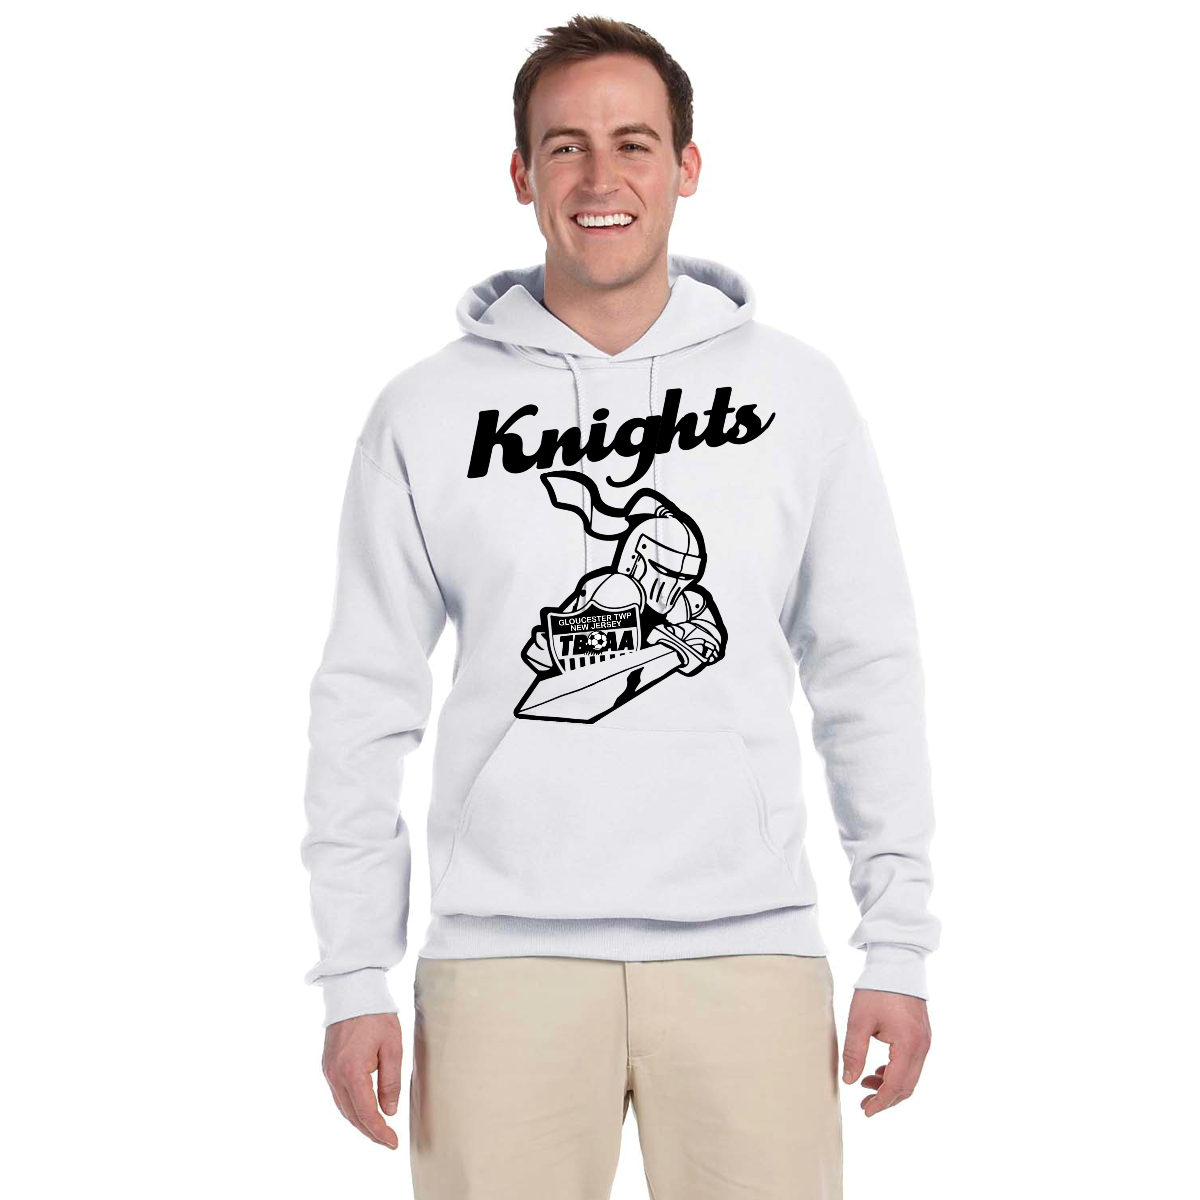 KNIGHTS  white Hoodie with black image